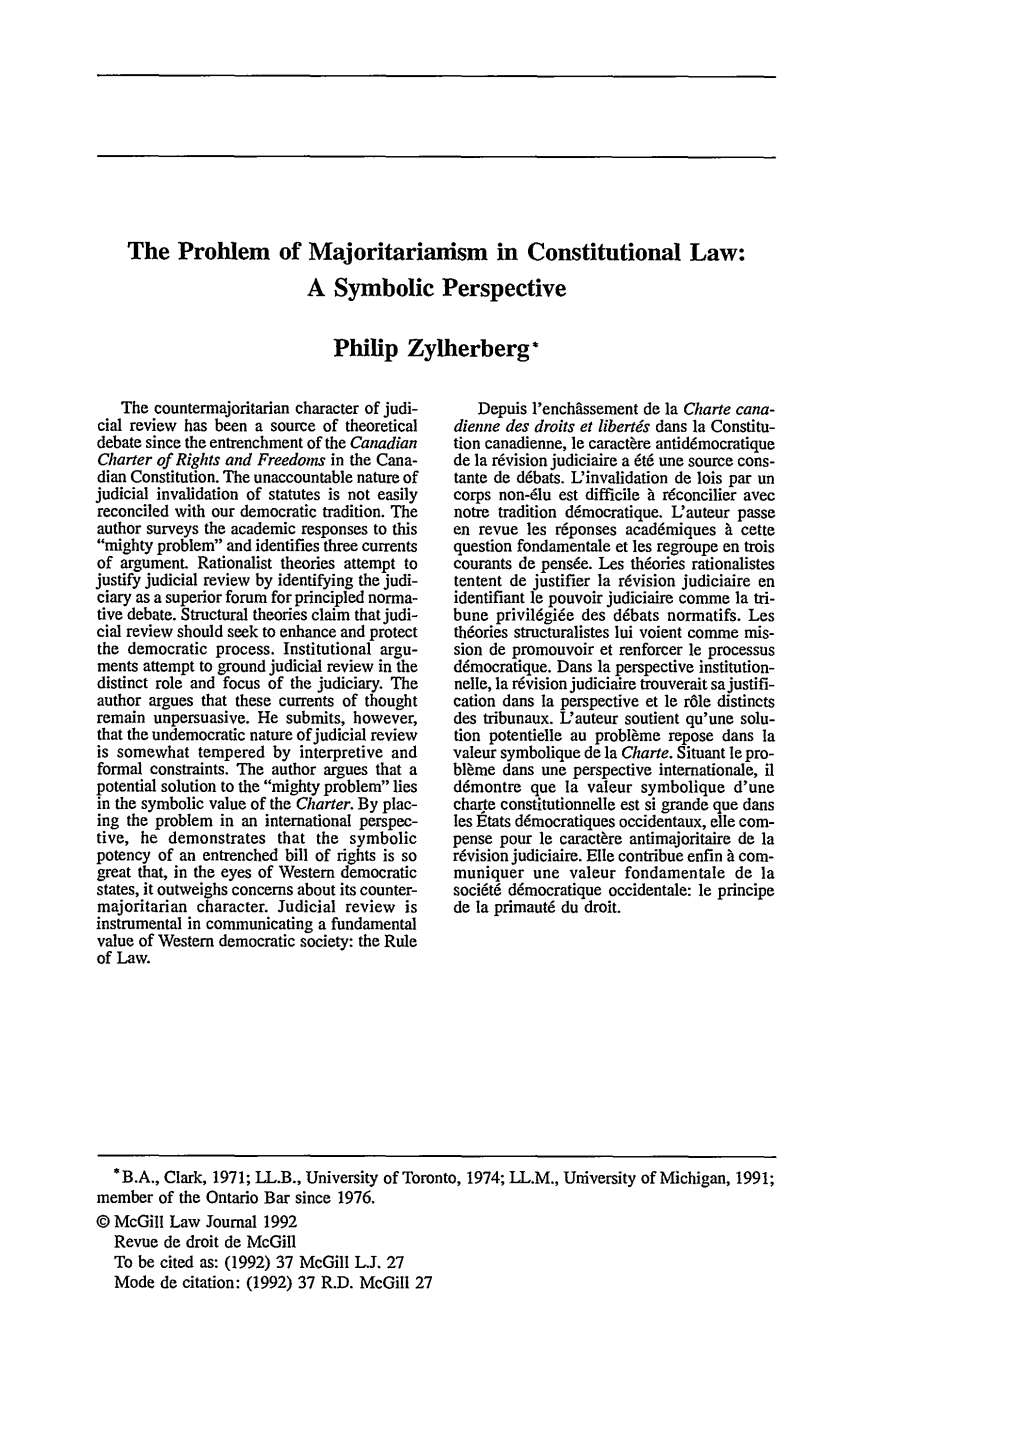 The Problem of Majoritarianism in Constitutional Law: a Symbolic Perspective Philip Zylberberg*